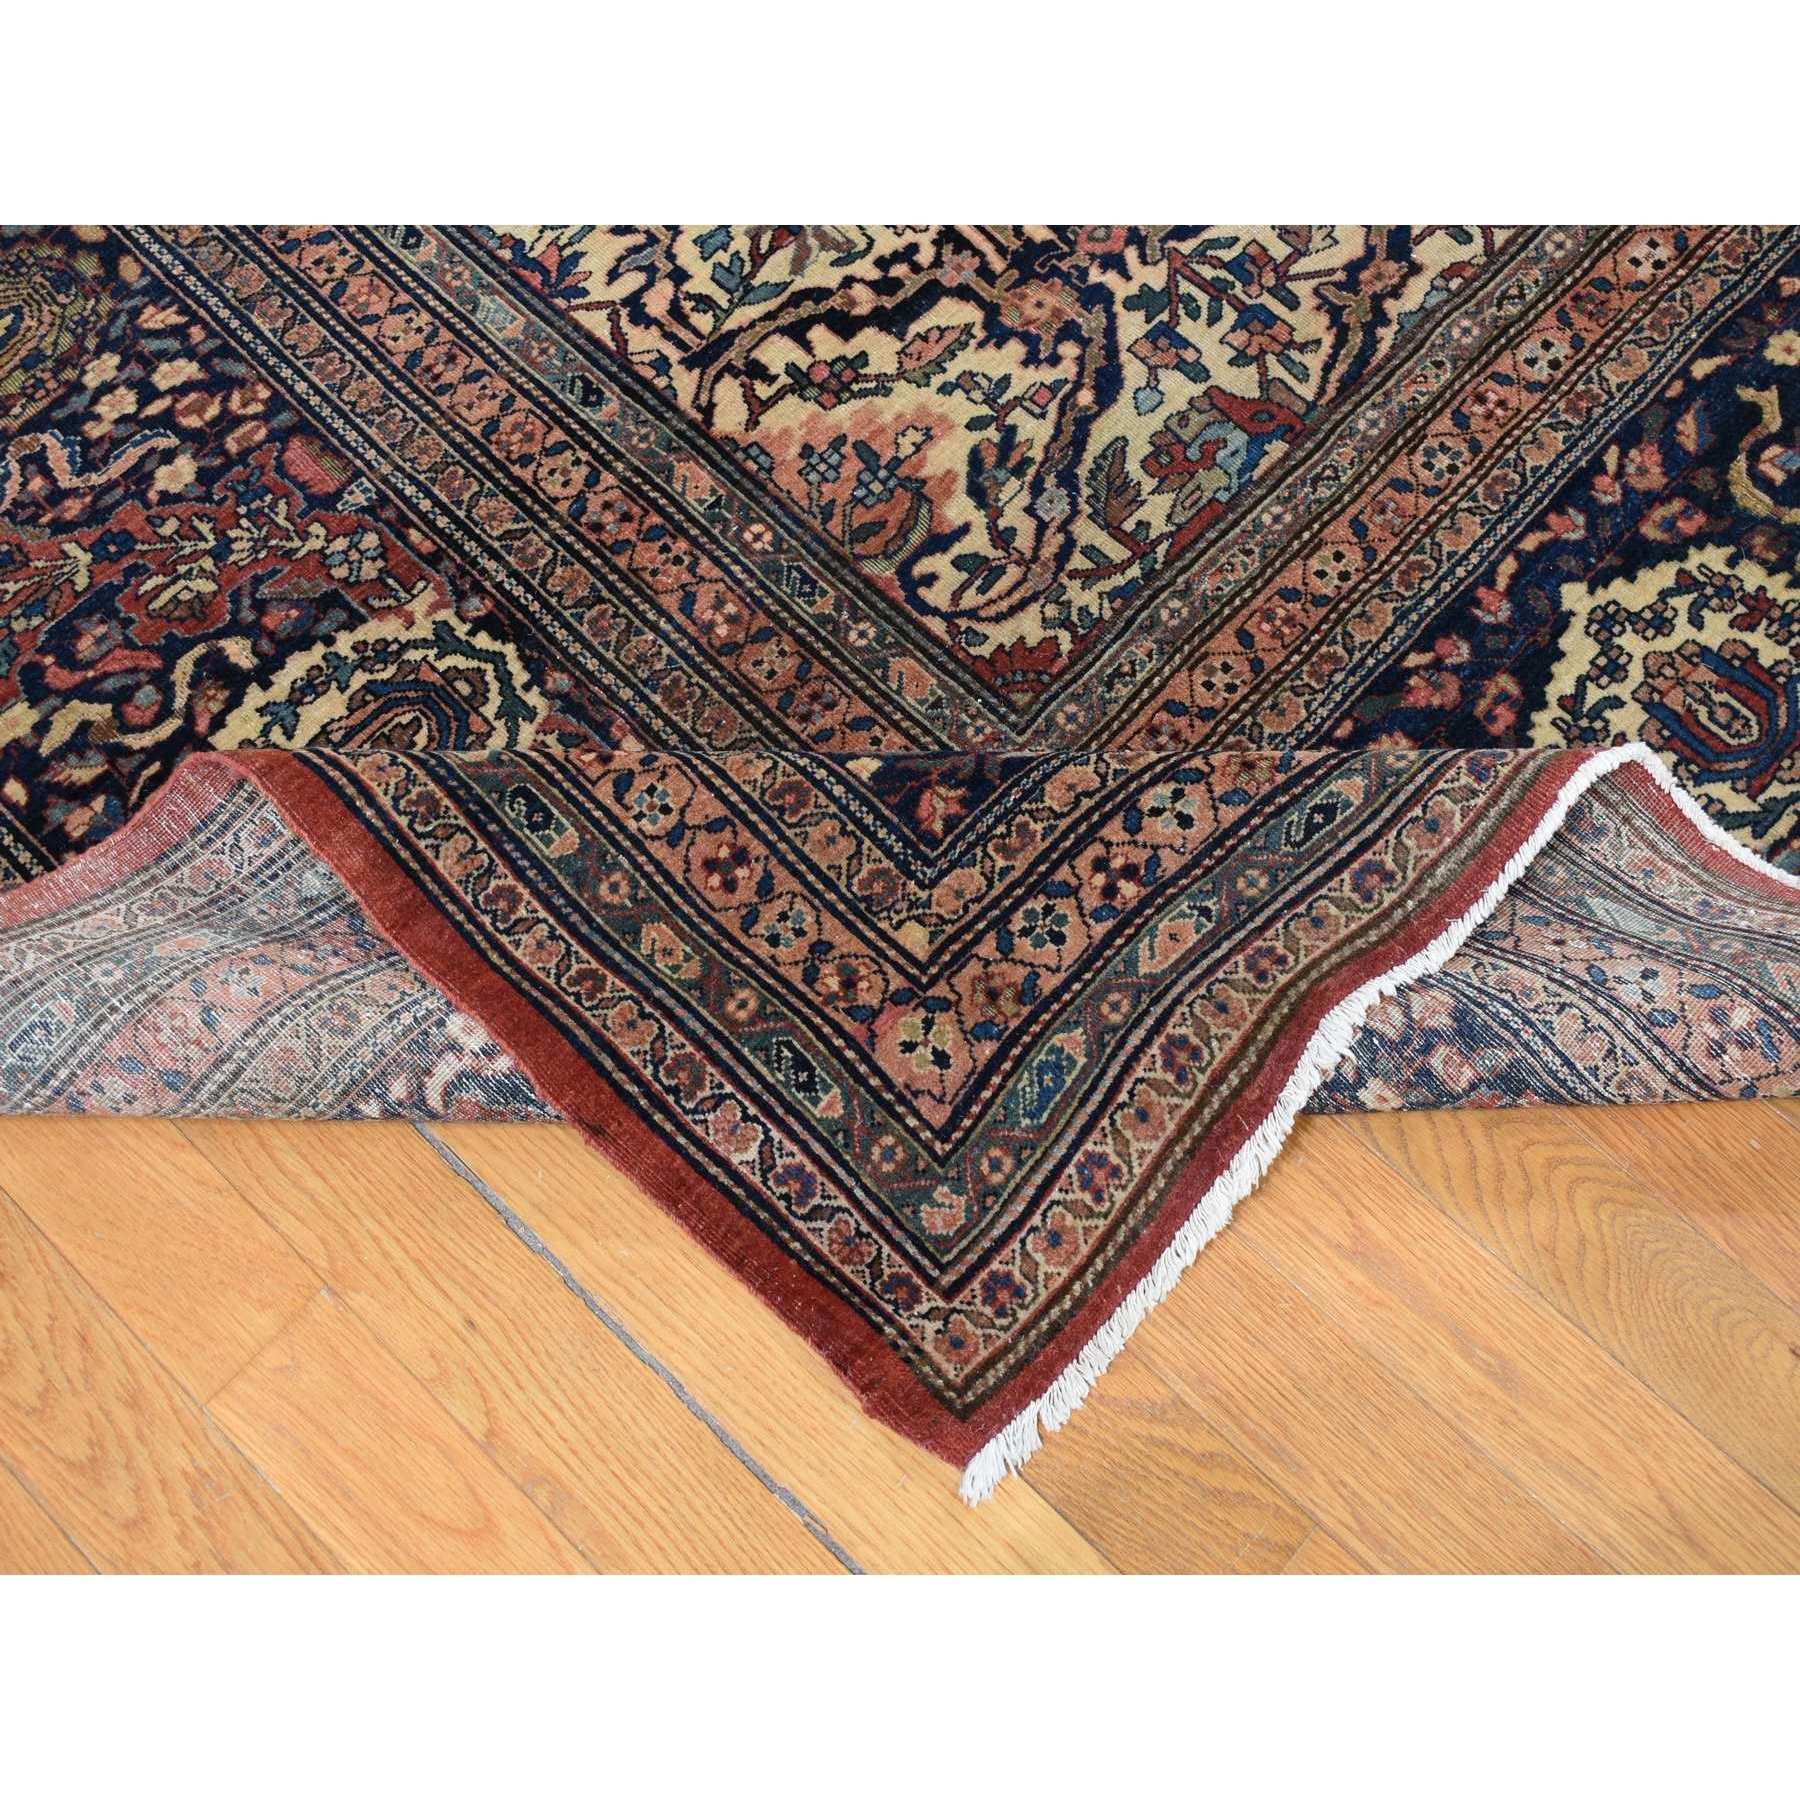 Early 20th Century Red XL Antique Persian Fereghan Sarouk Even Wear Hand Knotted Pure Wool Rug For Sale